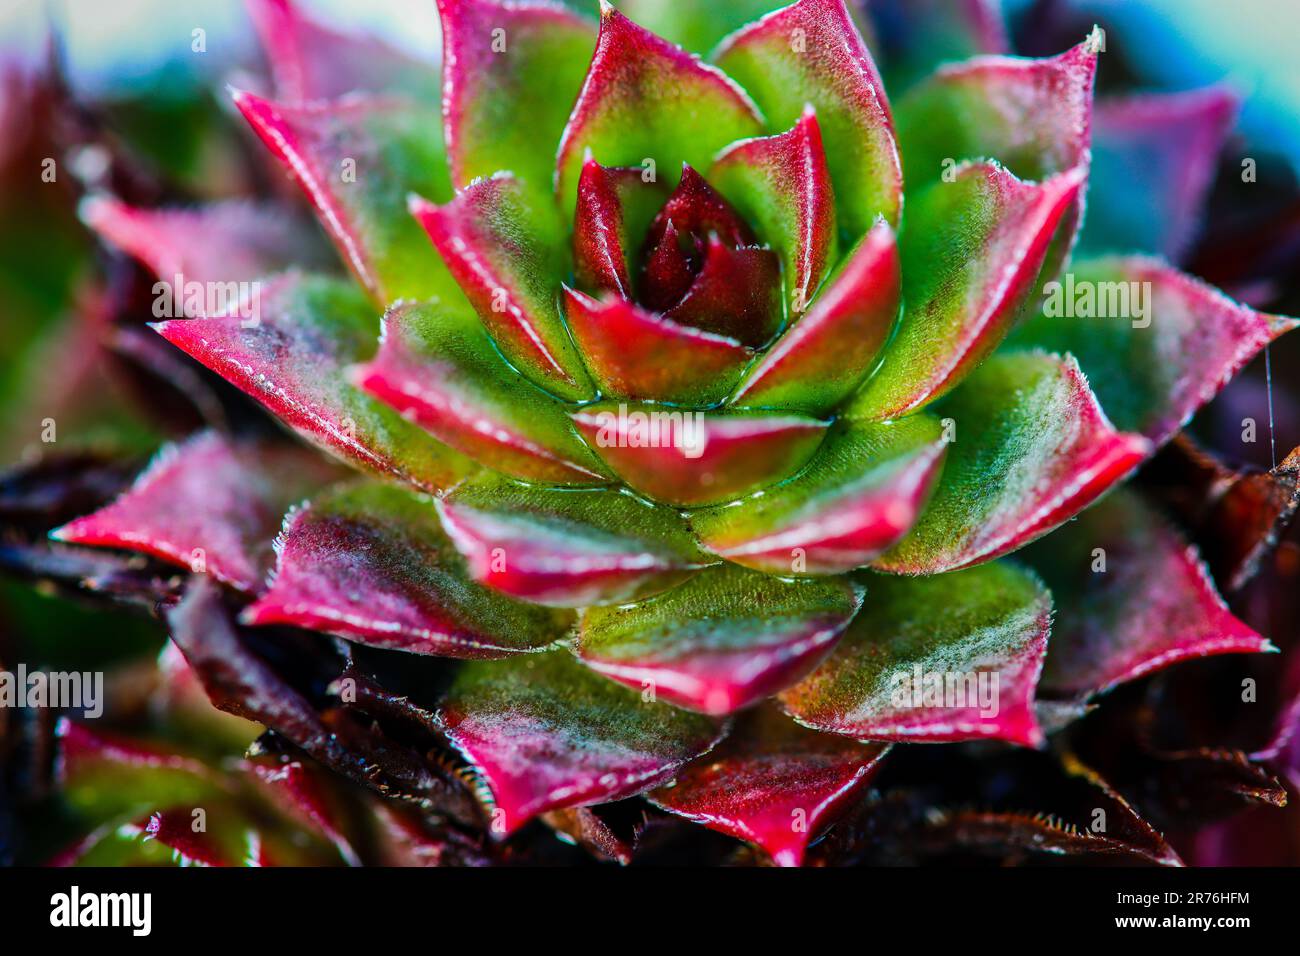 macro of a star shaped plant with red and green colors Stock Photo